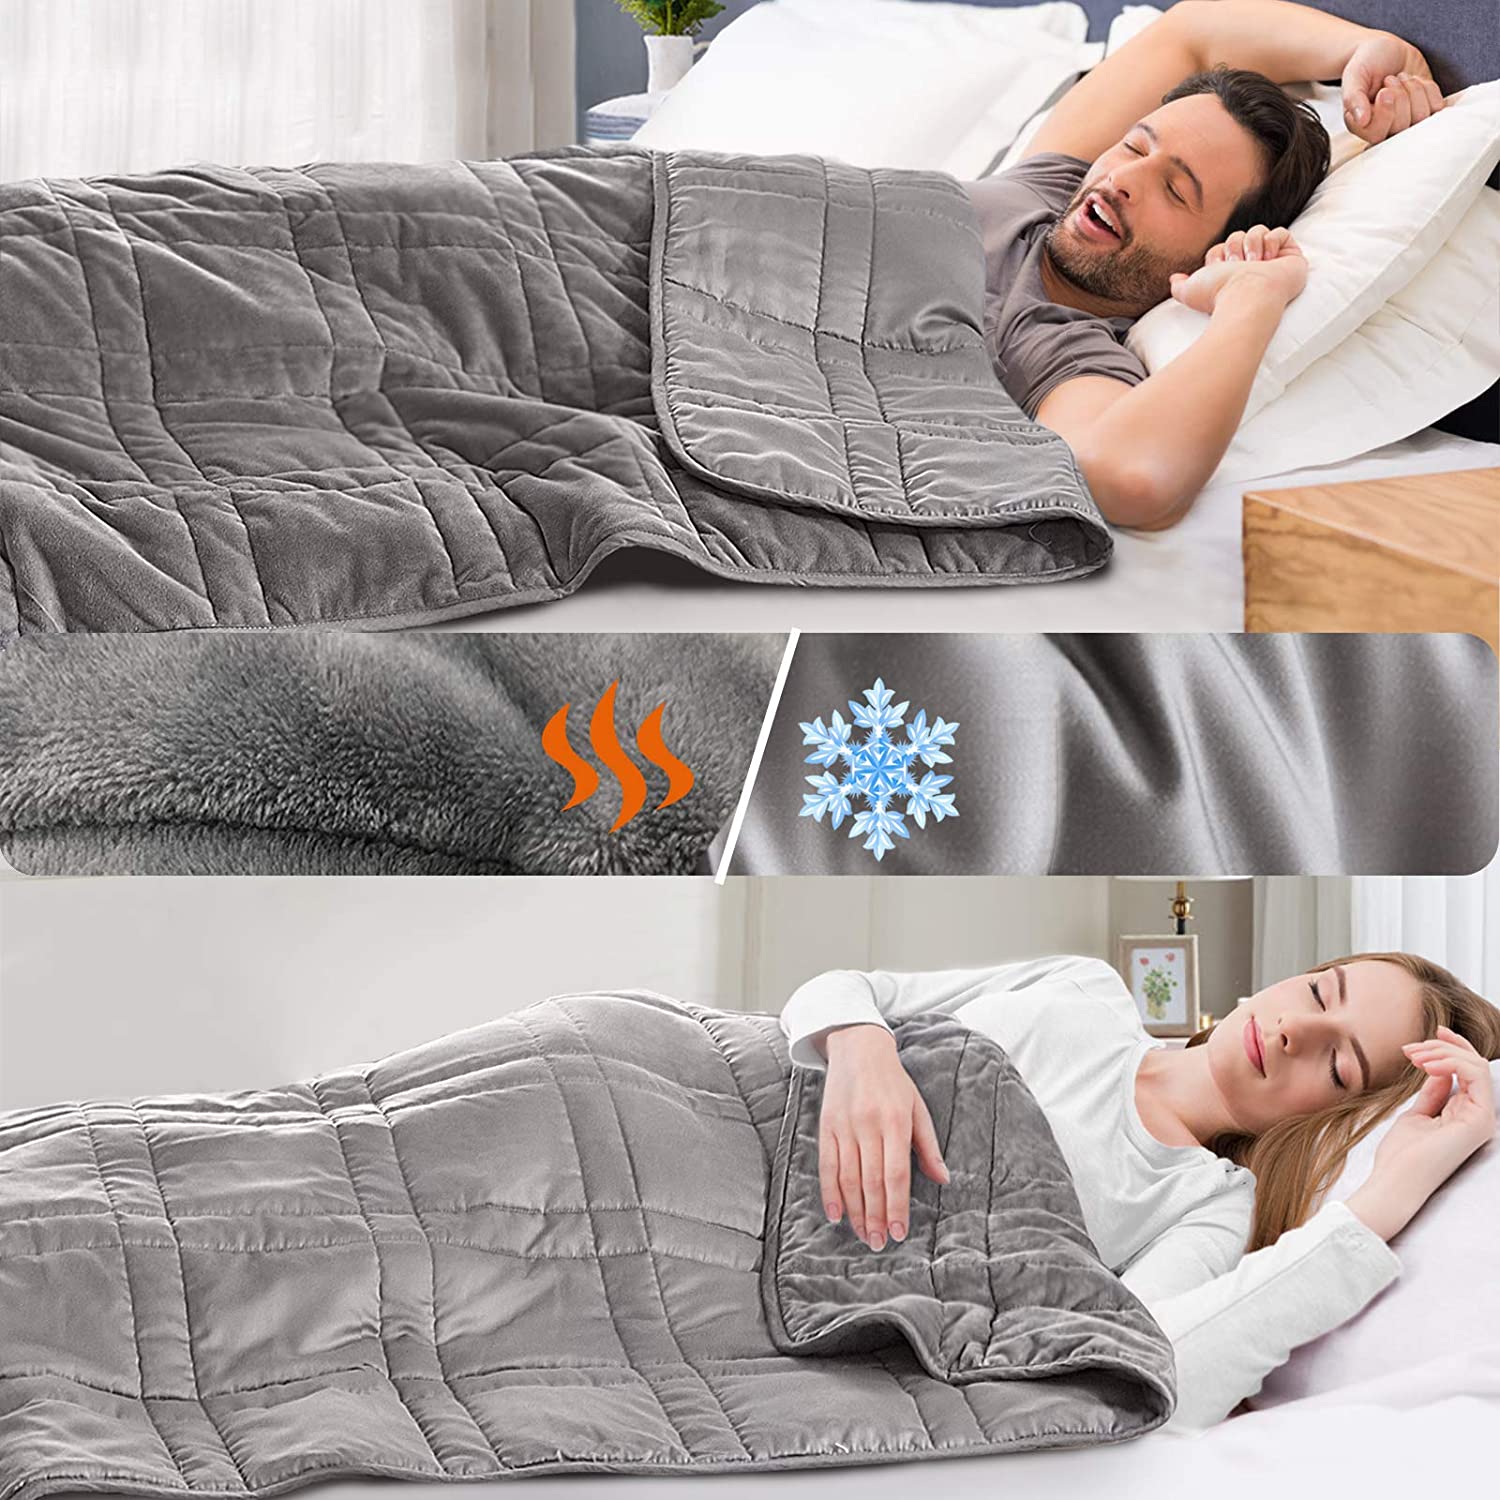 Weighted heated blanket